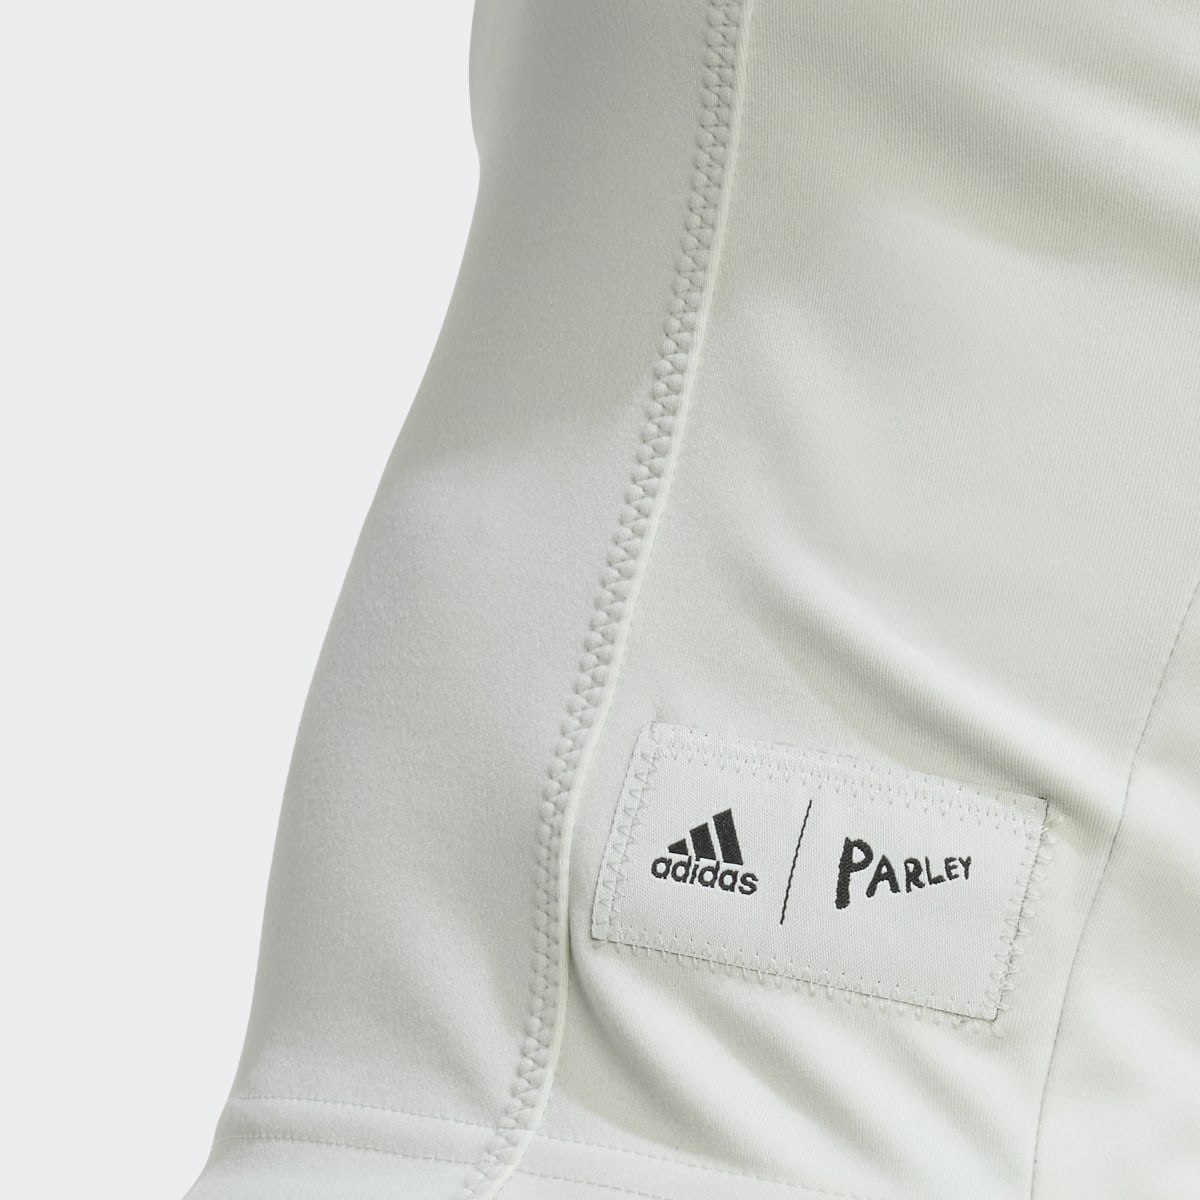 Adidas Parley Run for the Oceans Cropped Tank Top. 6